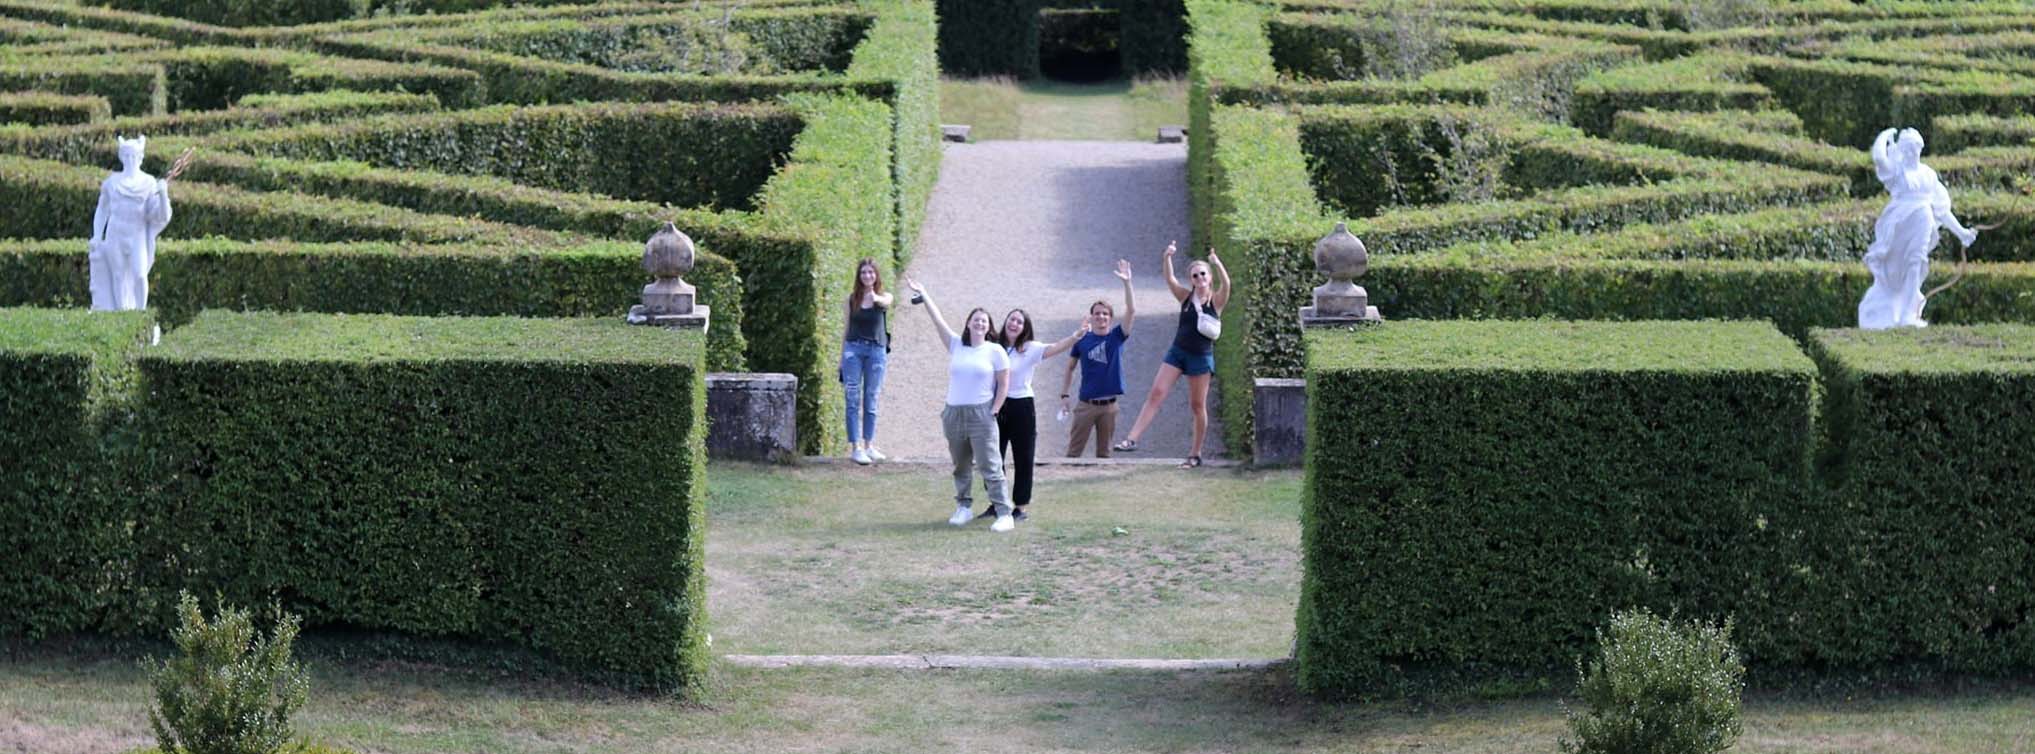  Students in a Luxembourg hedge maze